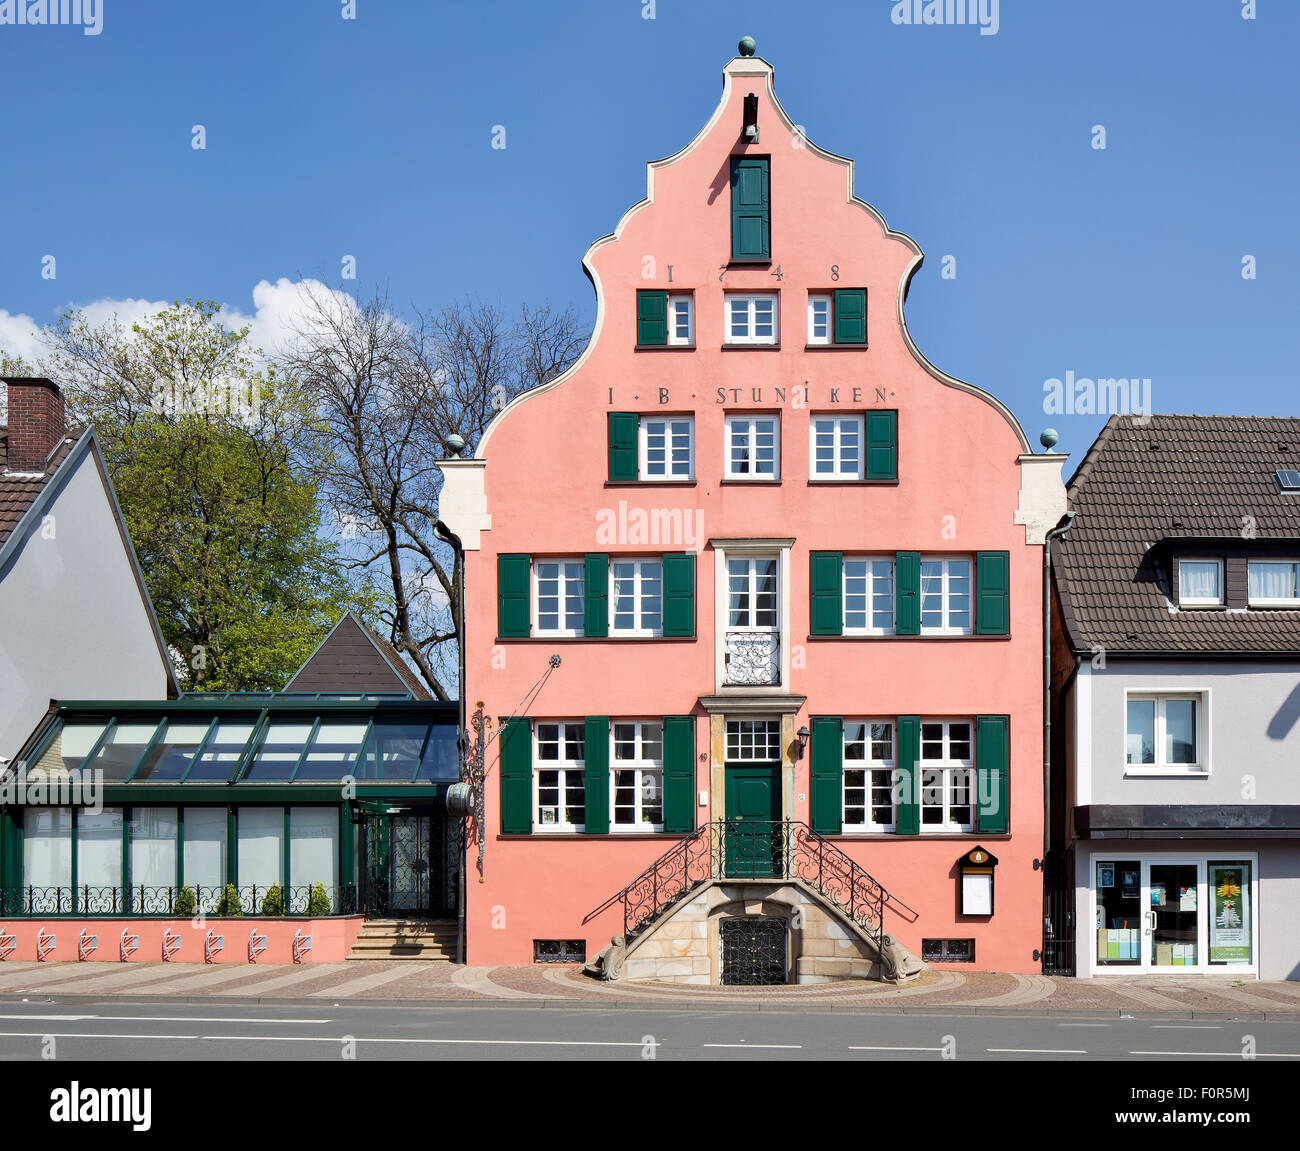 Stuniken House Hamm Germany High Resolution Stock Photography and Images -  Alamy